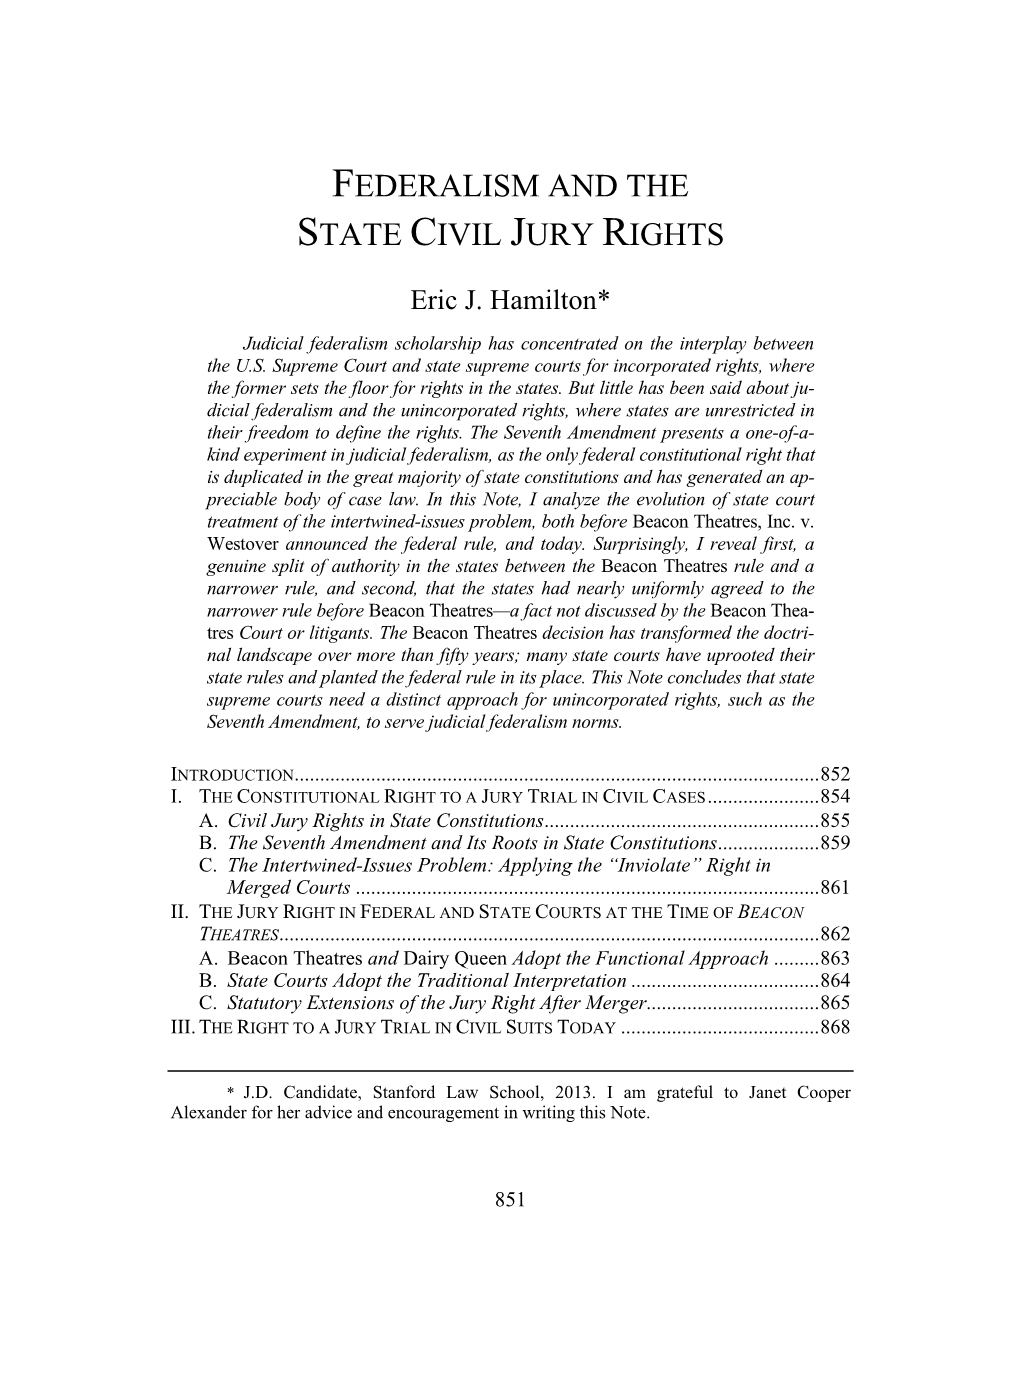 Federalism and the State Civil Jury Rights